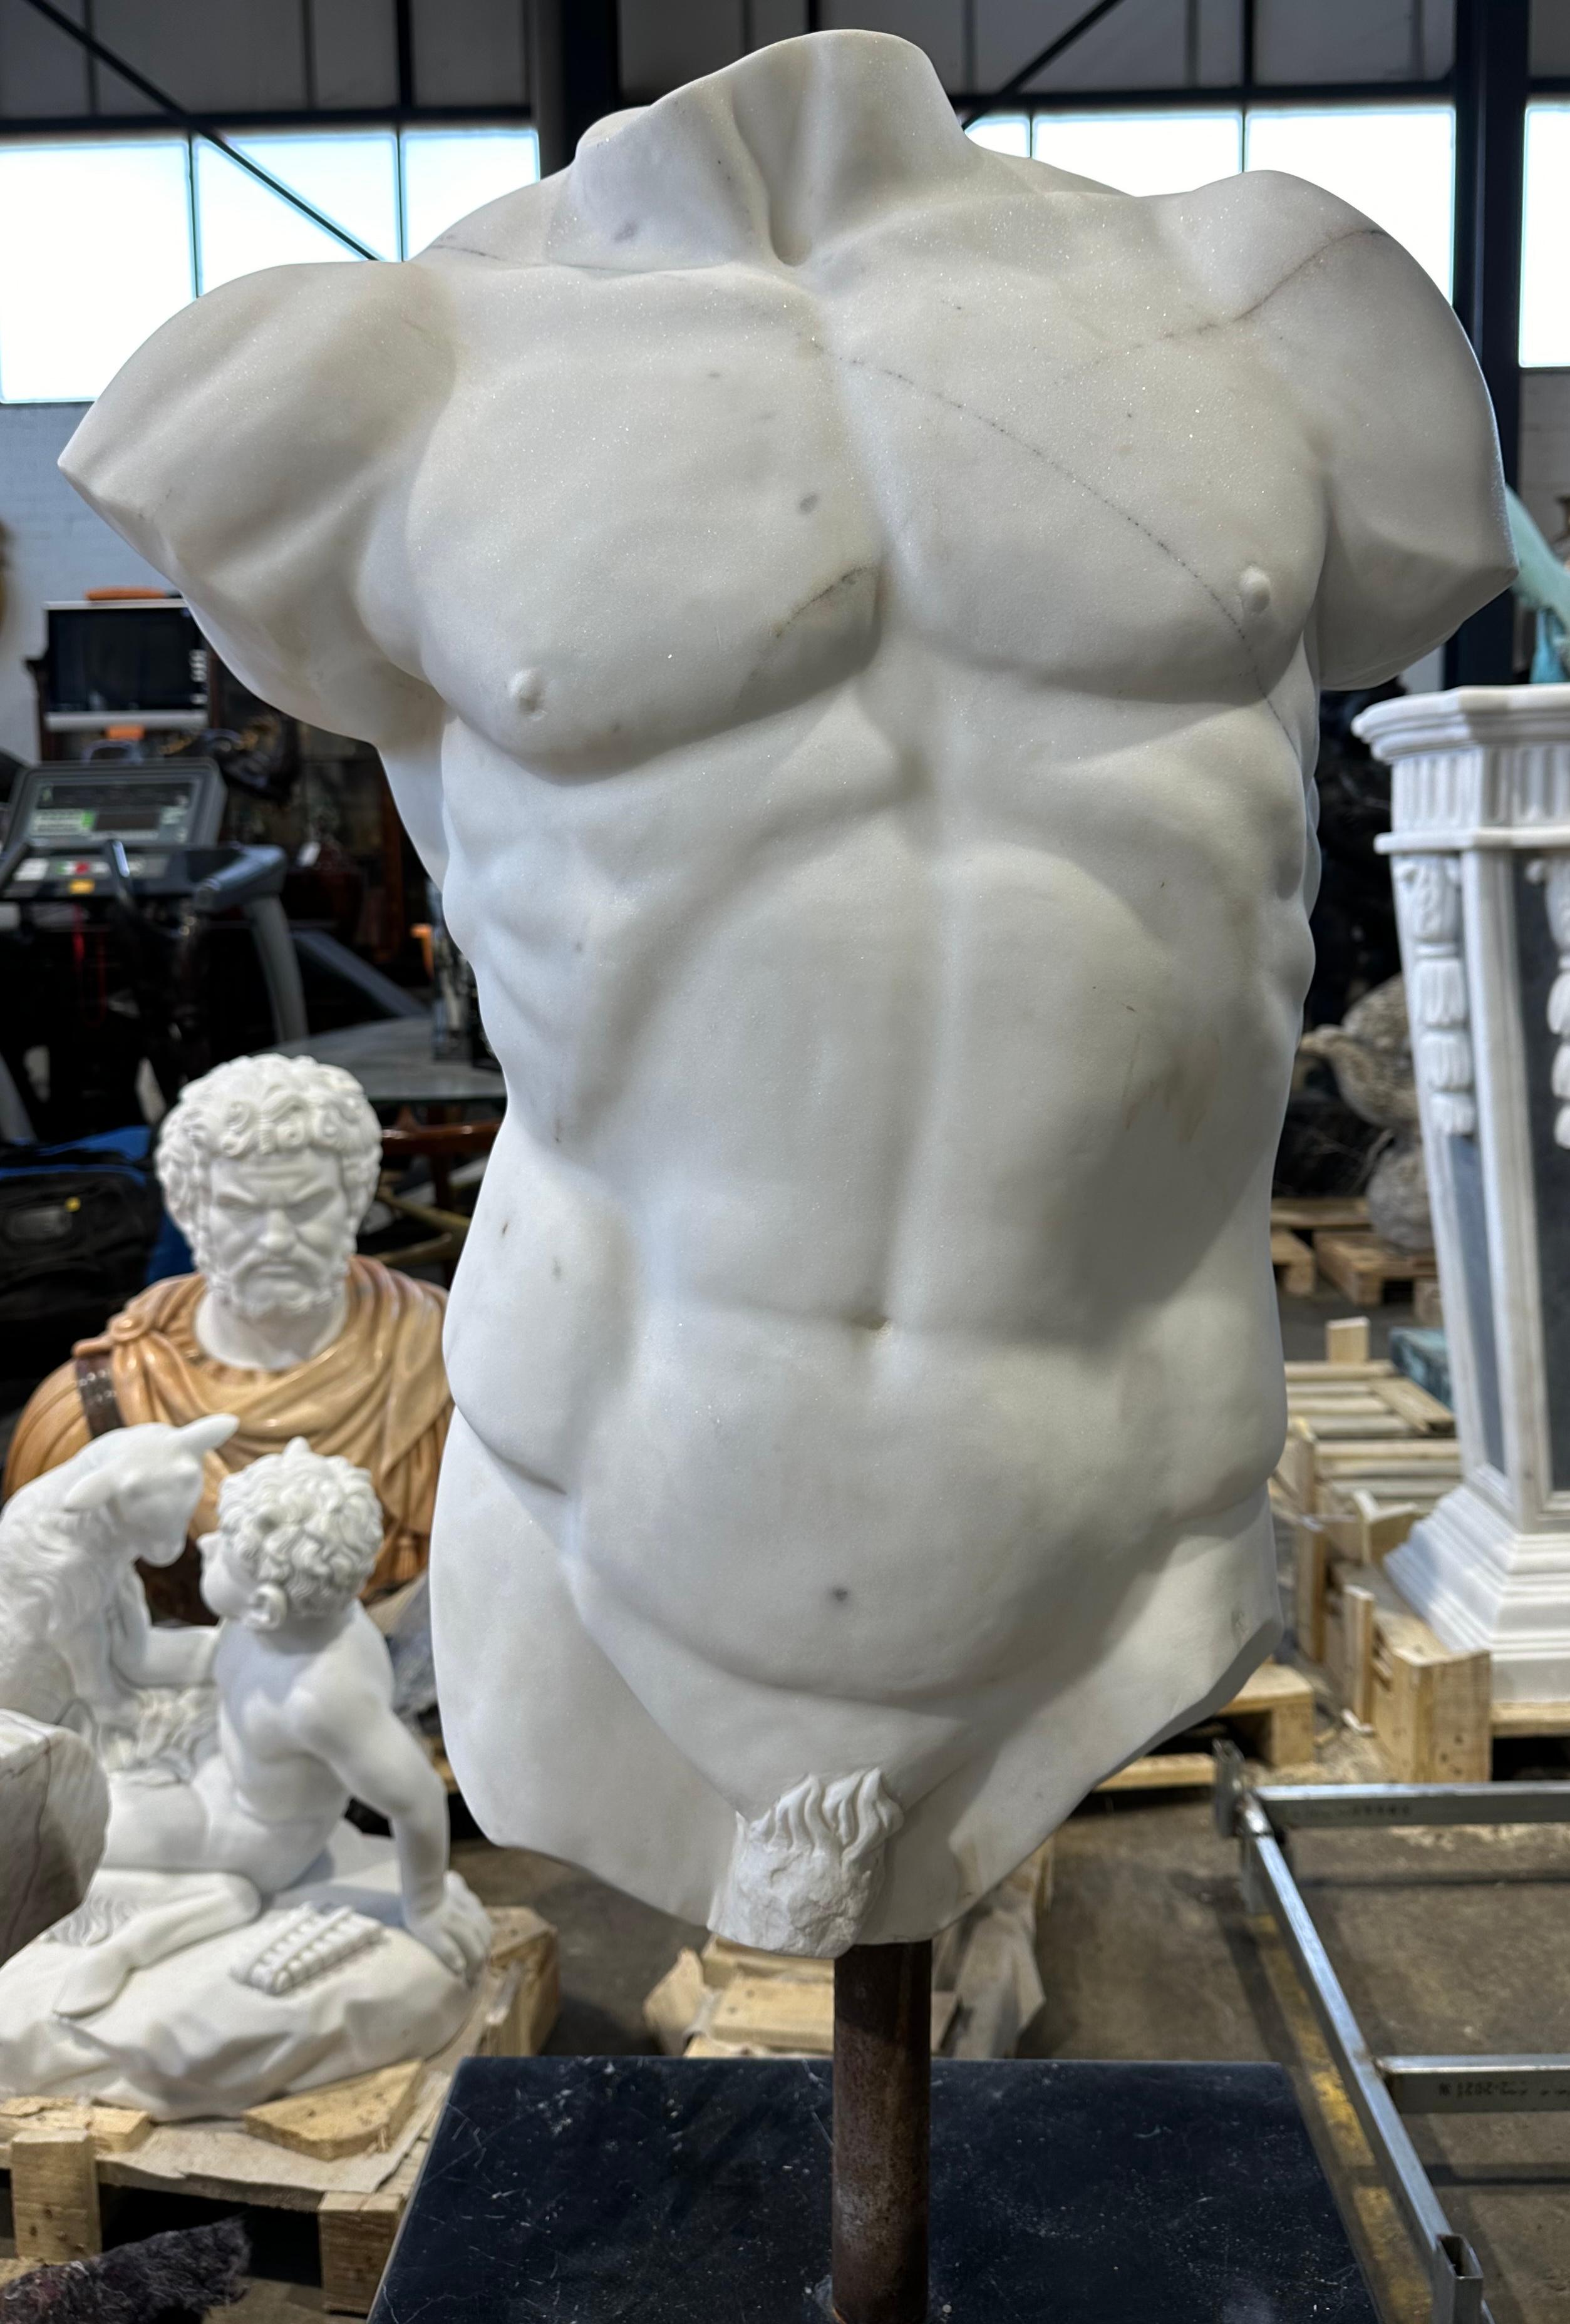 A handsome hand-carved marble male torso in white marble on a black marble square base. The torso is skilfully carved with rippling muscles which complement the smoothness of the marble skin. A large and imposing piece that would look very grand in